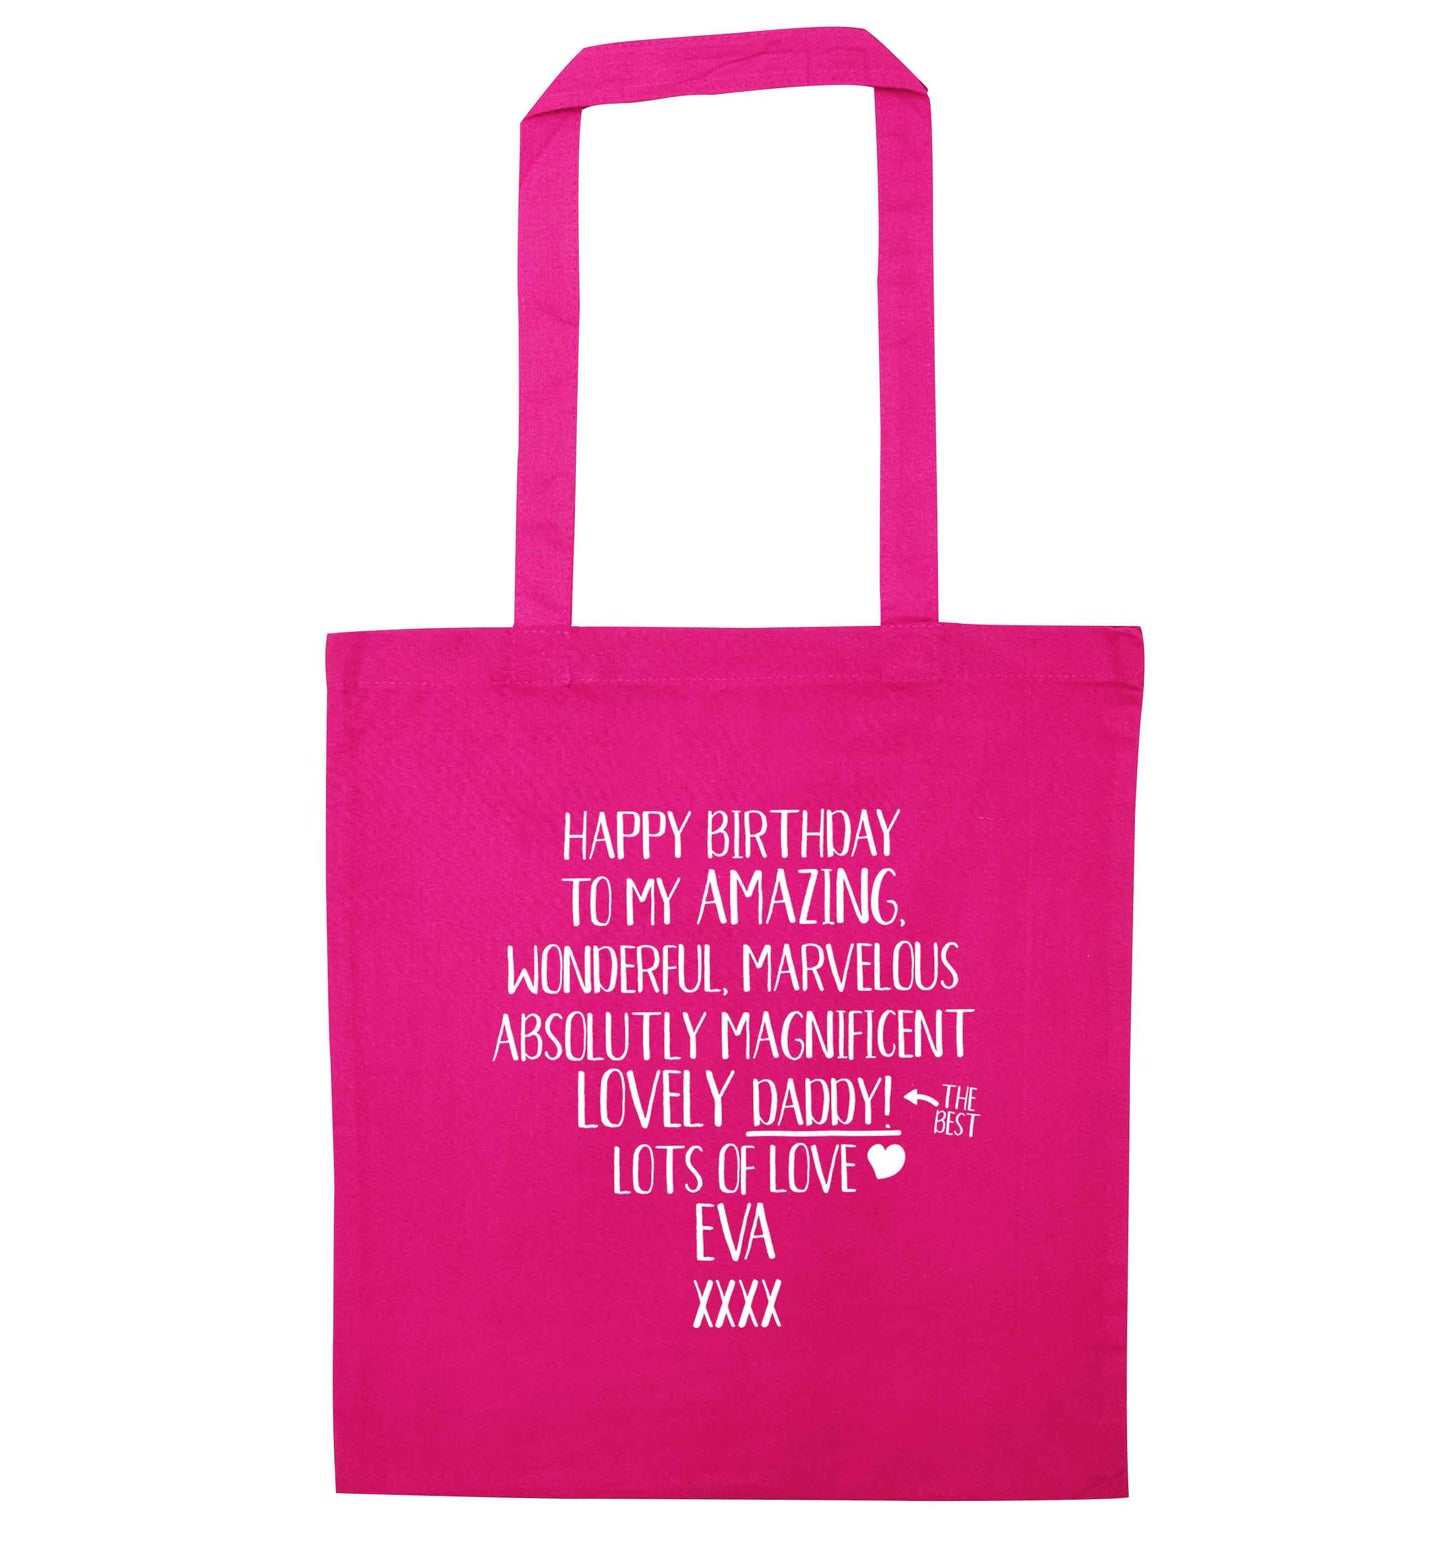 Personalised happy birthday to my amazing, wonderful, lovely daddy pink tote bag